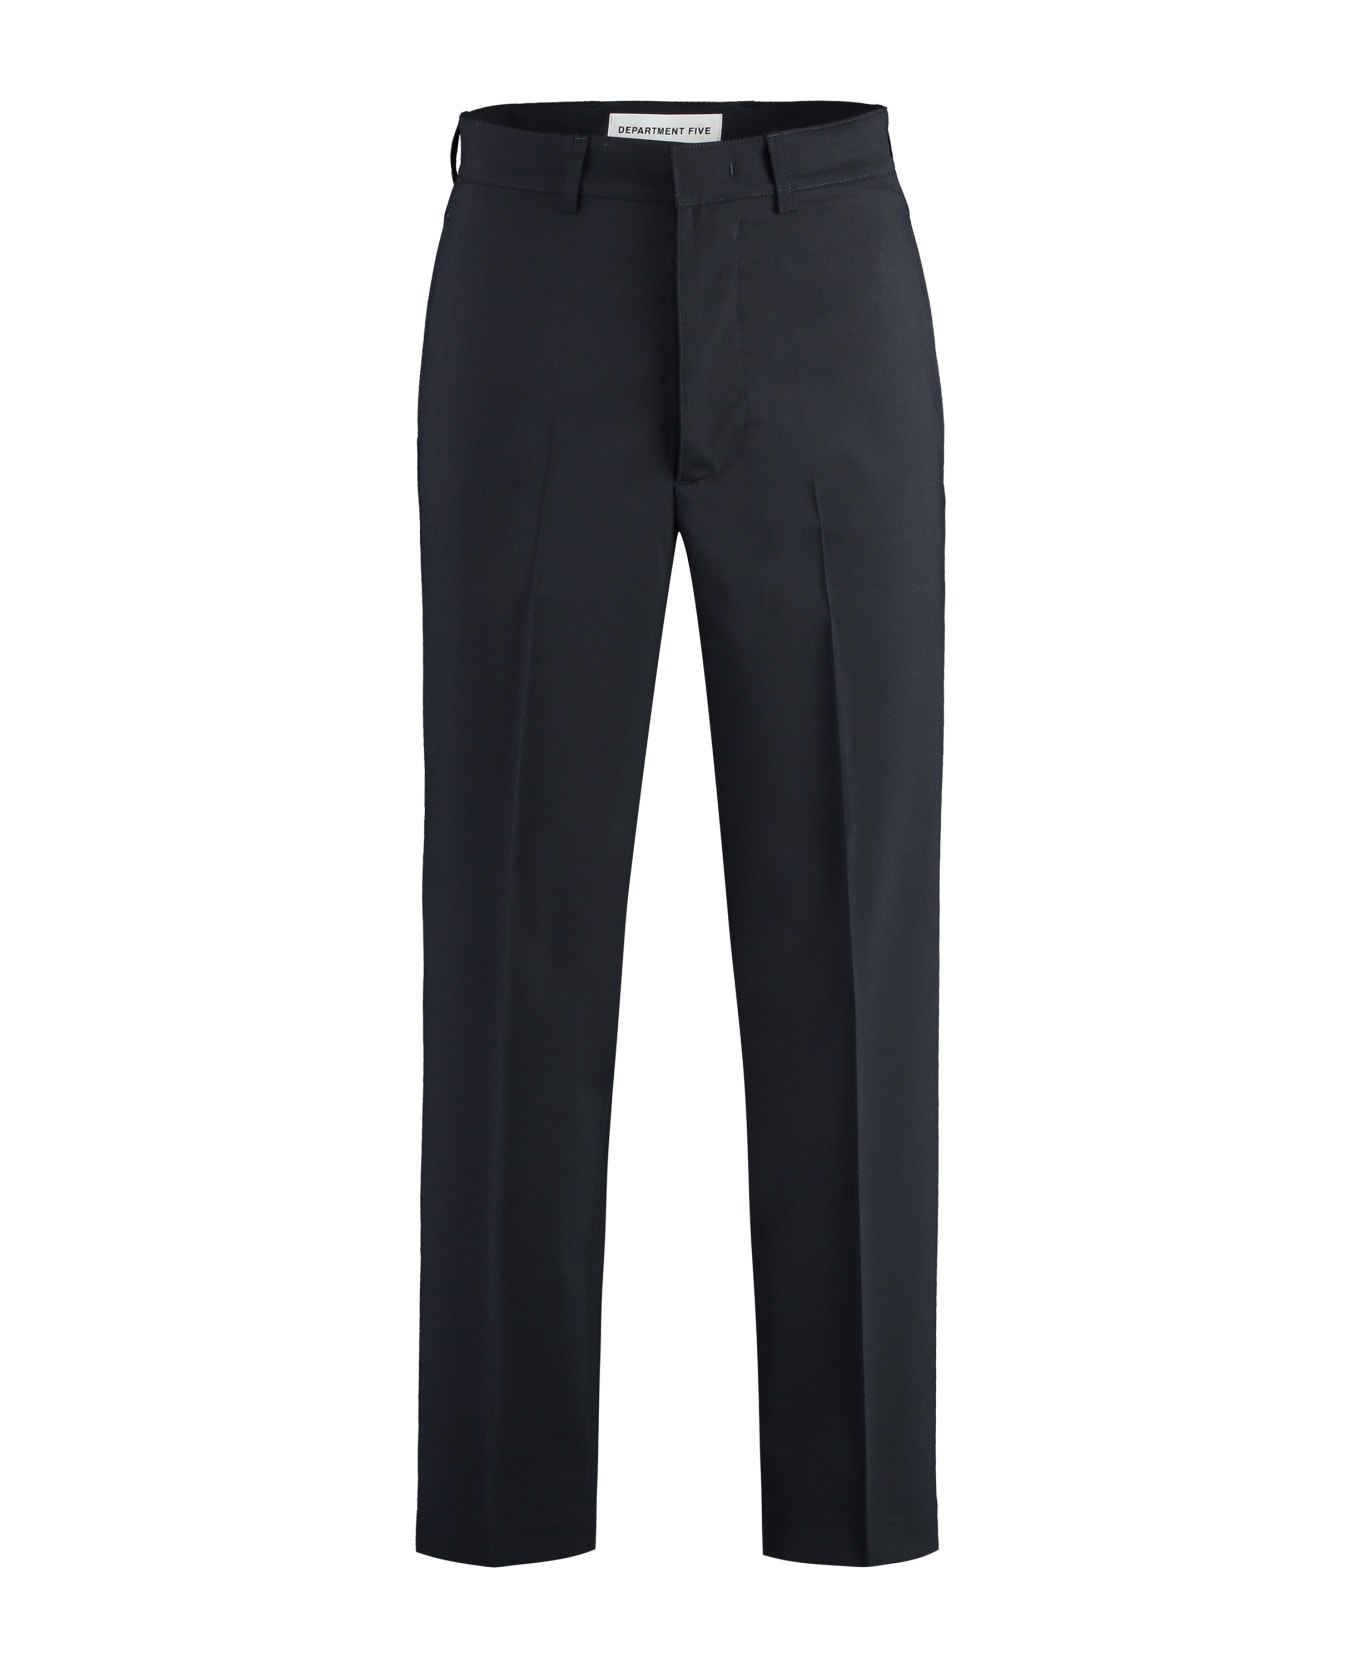 Department Five E-motion Wool Blend Trousers